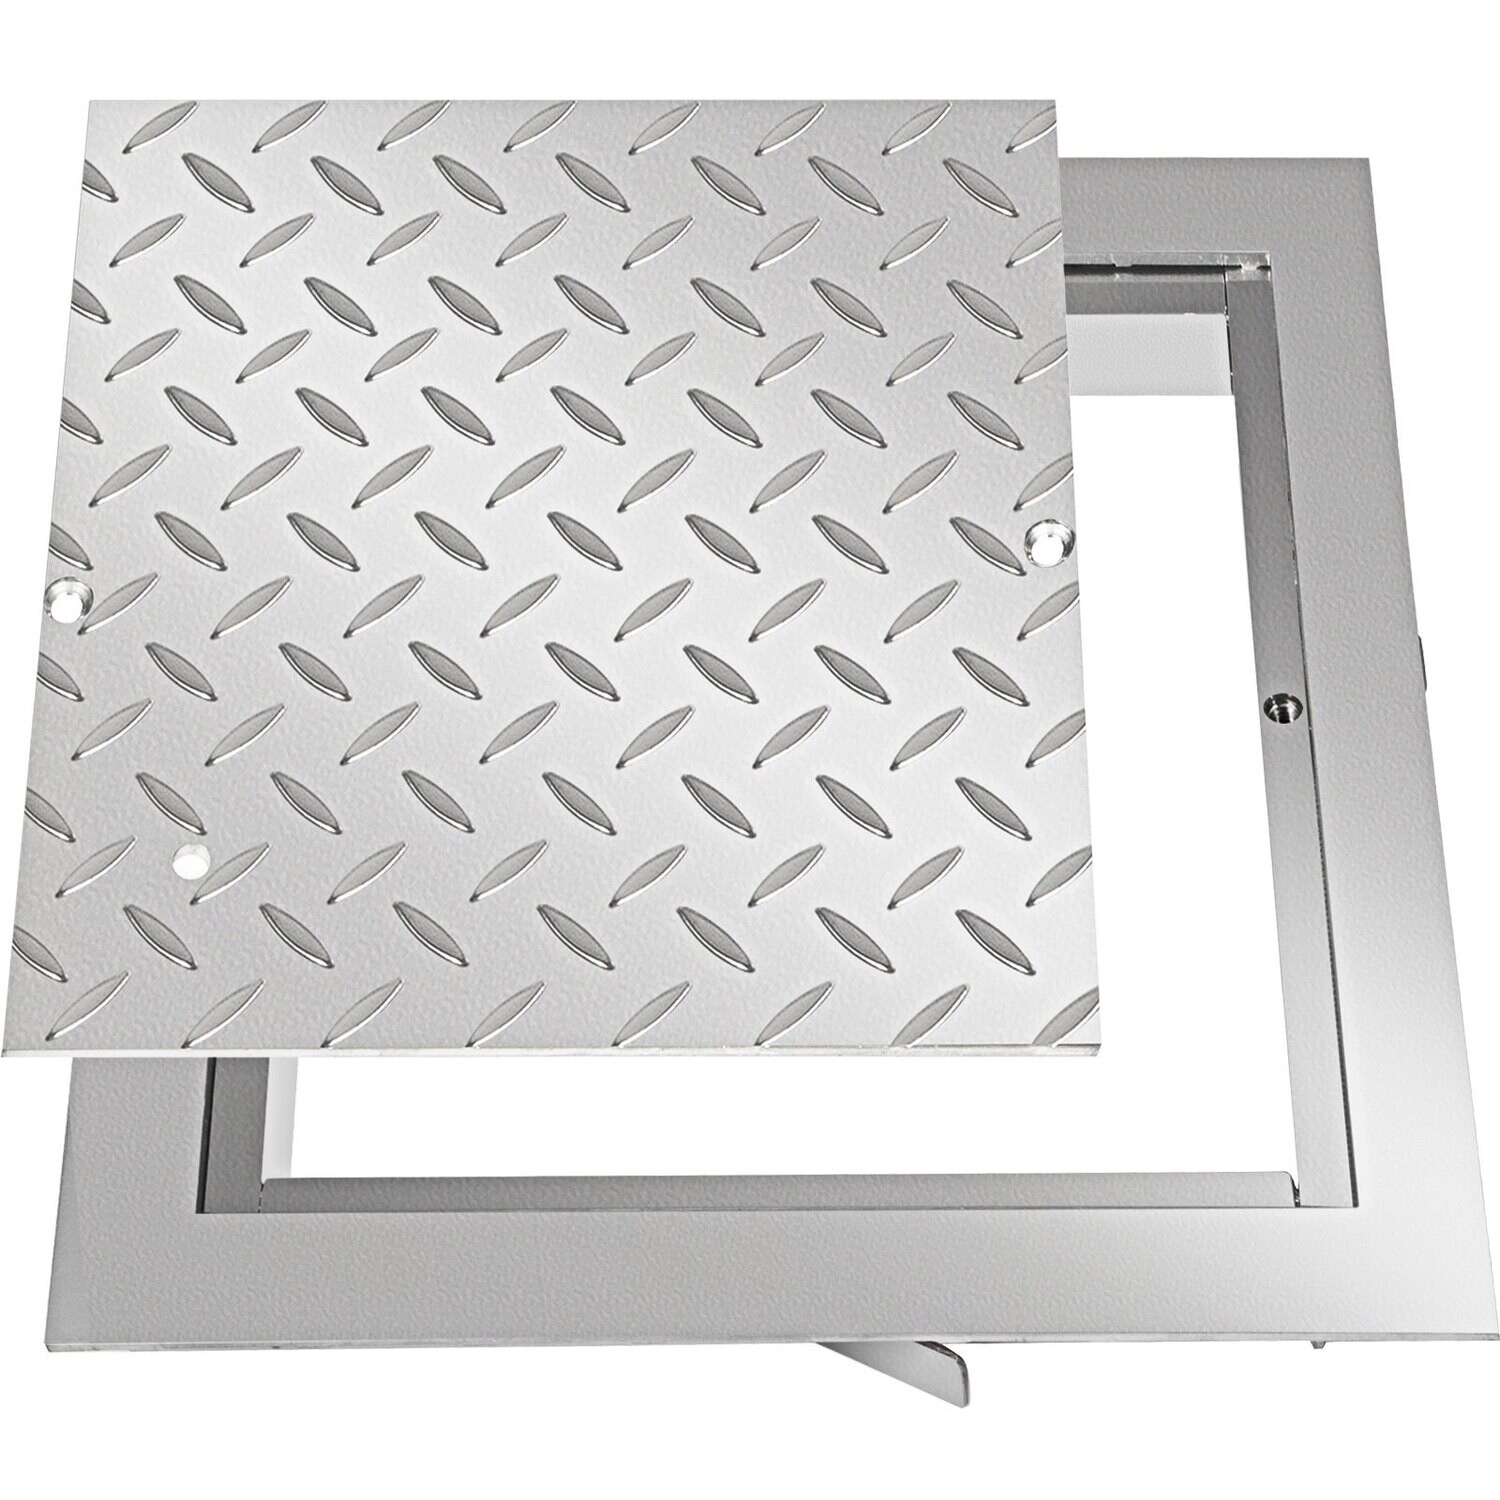 Manhole Cover 30X30 cm Clear Opening, Galvanized Steel Drain Cover Steel Manhole Silver